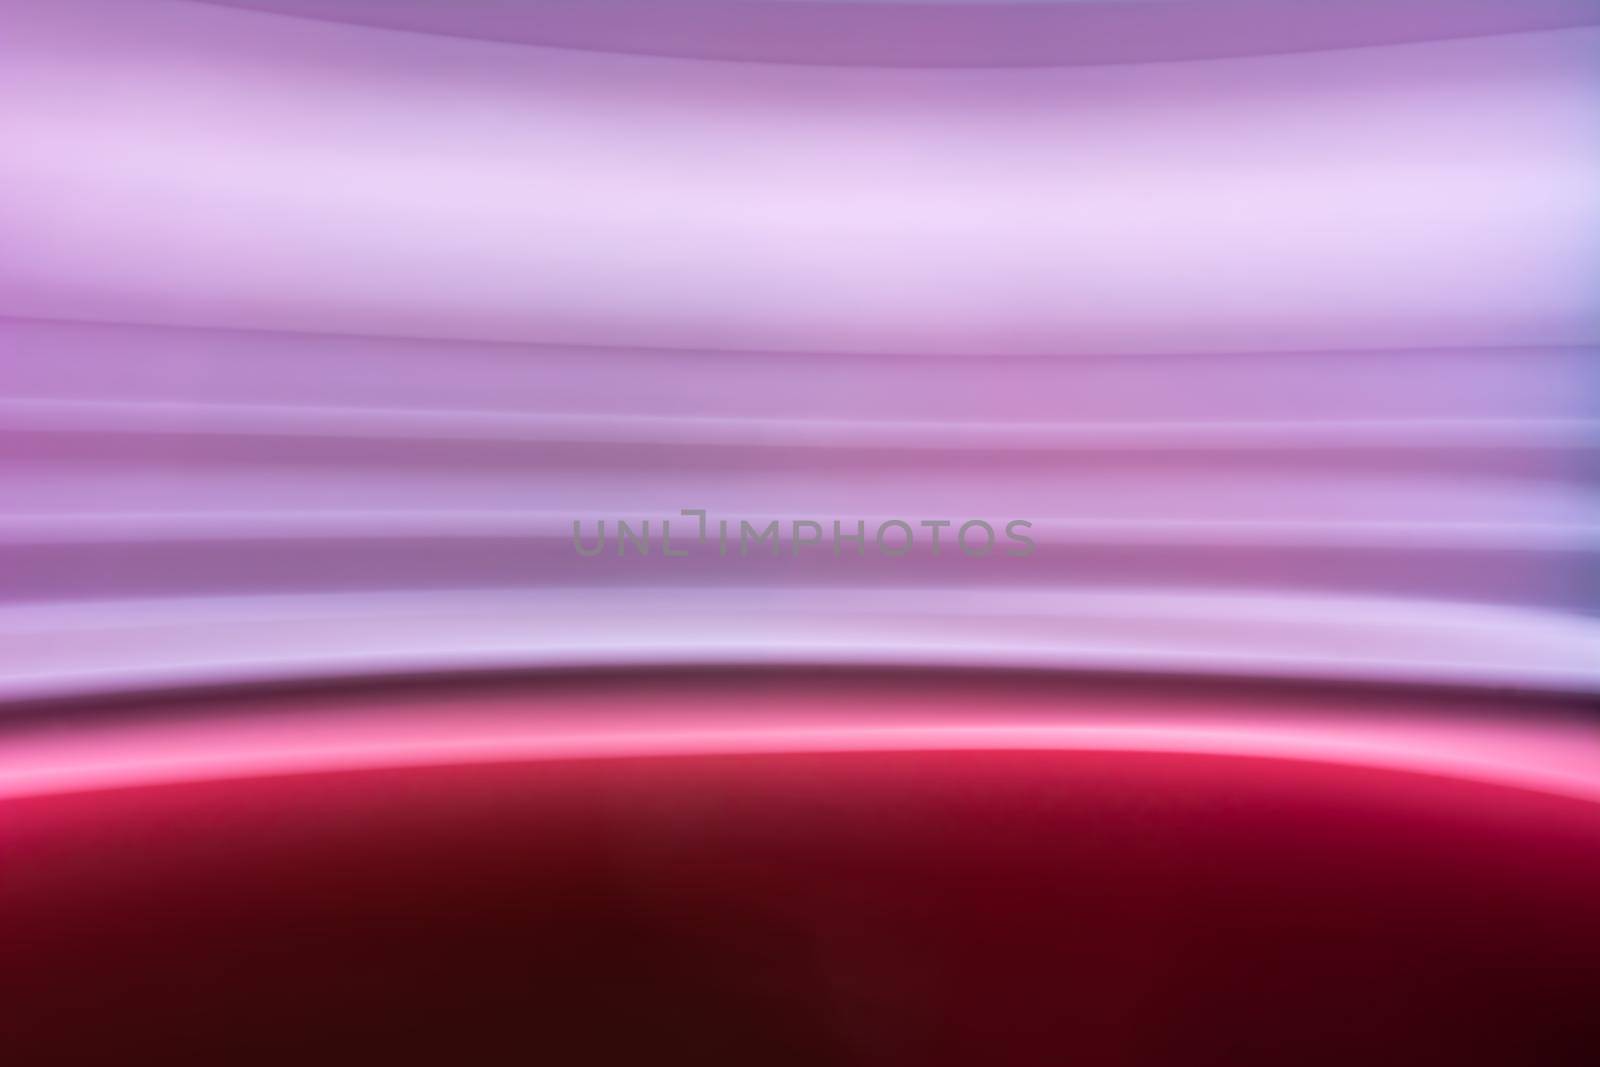 Blurred photo with colorful horizontal lines in pink, lilac, purple. Abstract backdrop.